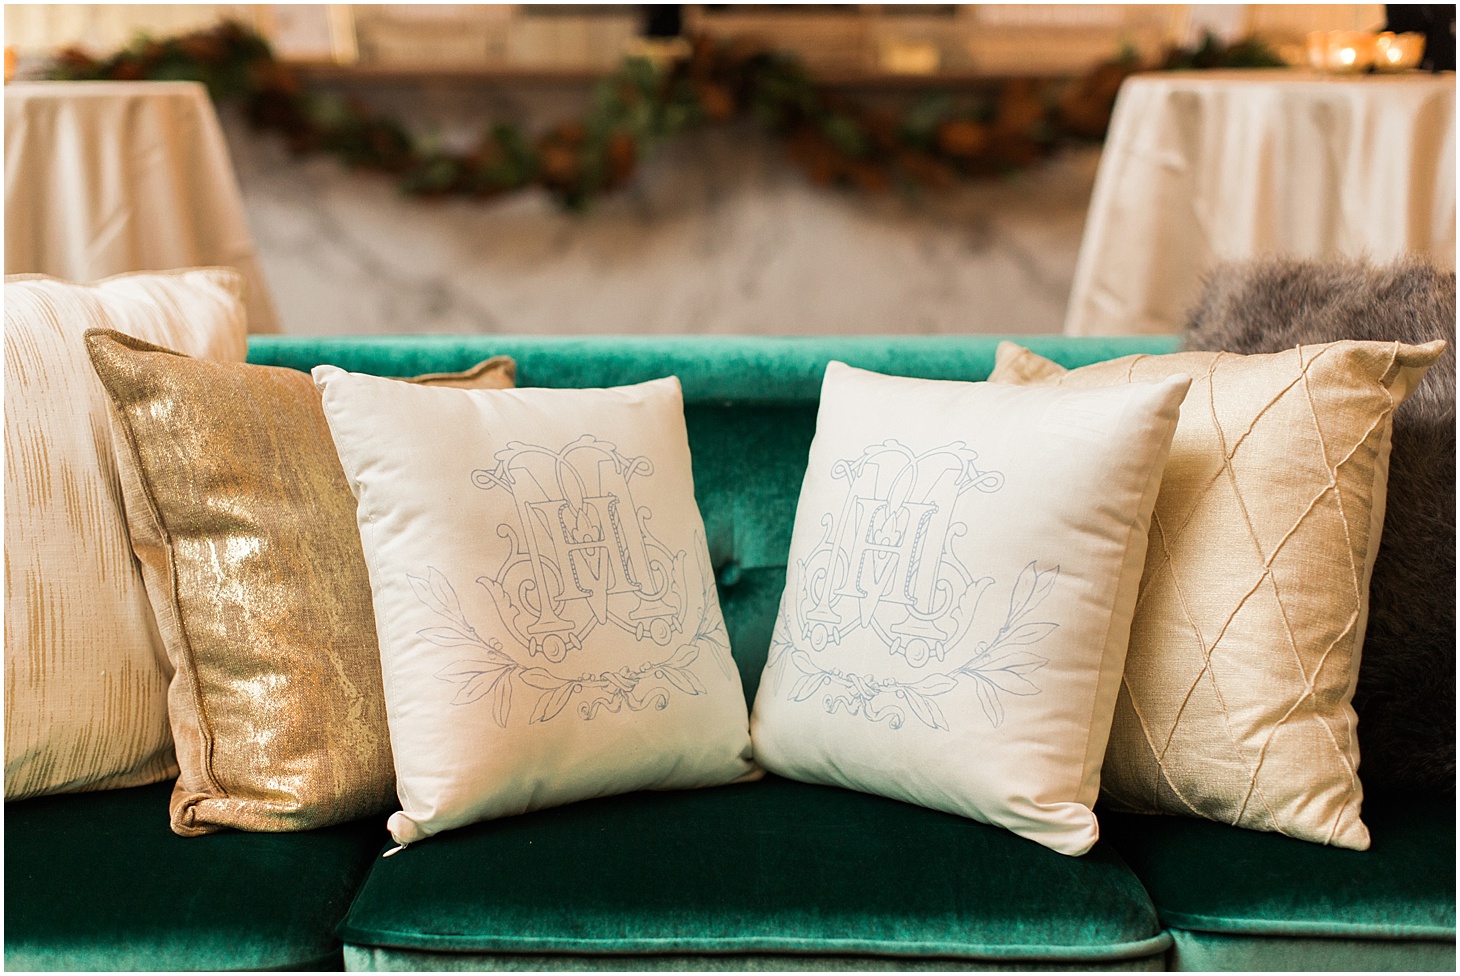 Monogramed Pillows at Wedding Reception | Southern Black Tie wedding at St. Regis Washington, DC in Dusty Blue and Ivory | Sarah Bradshaw Photography